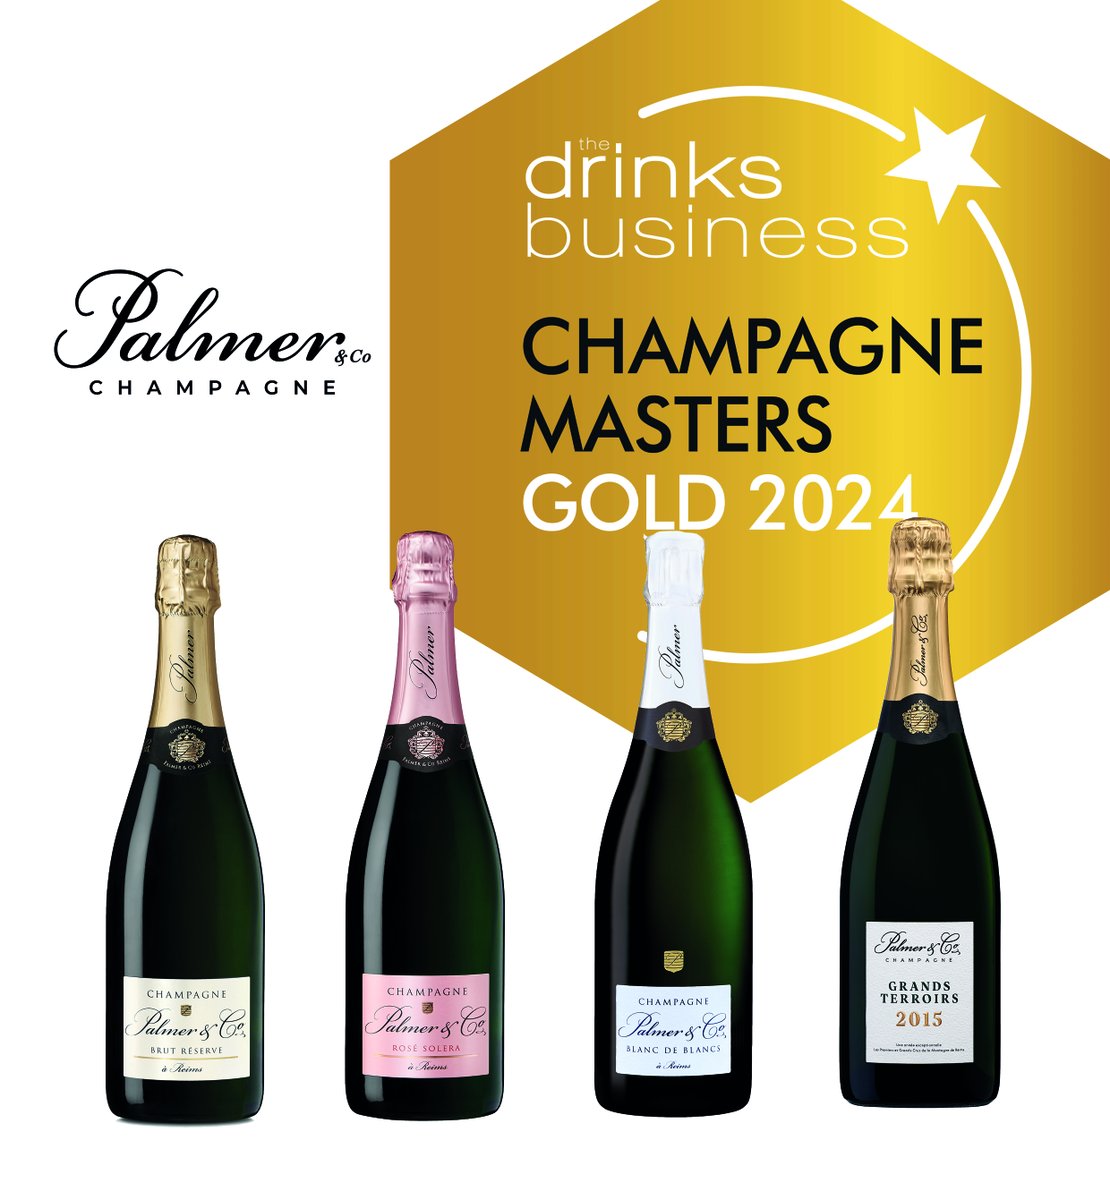 Thank you @teamdb for providing a platform where excellence is celebrated. Our deepest gratitude for the incredible honour of being awarded four gold medals at the Champagne masters 2024. #champagnemasters